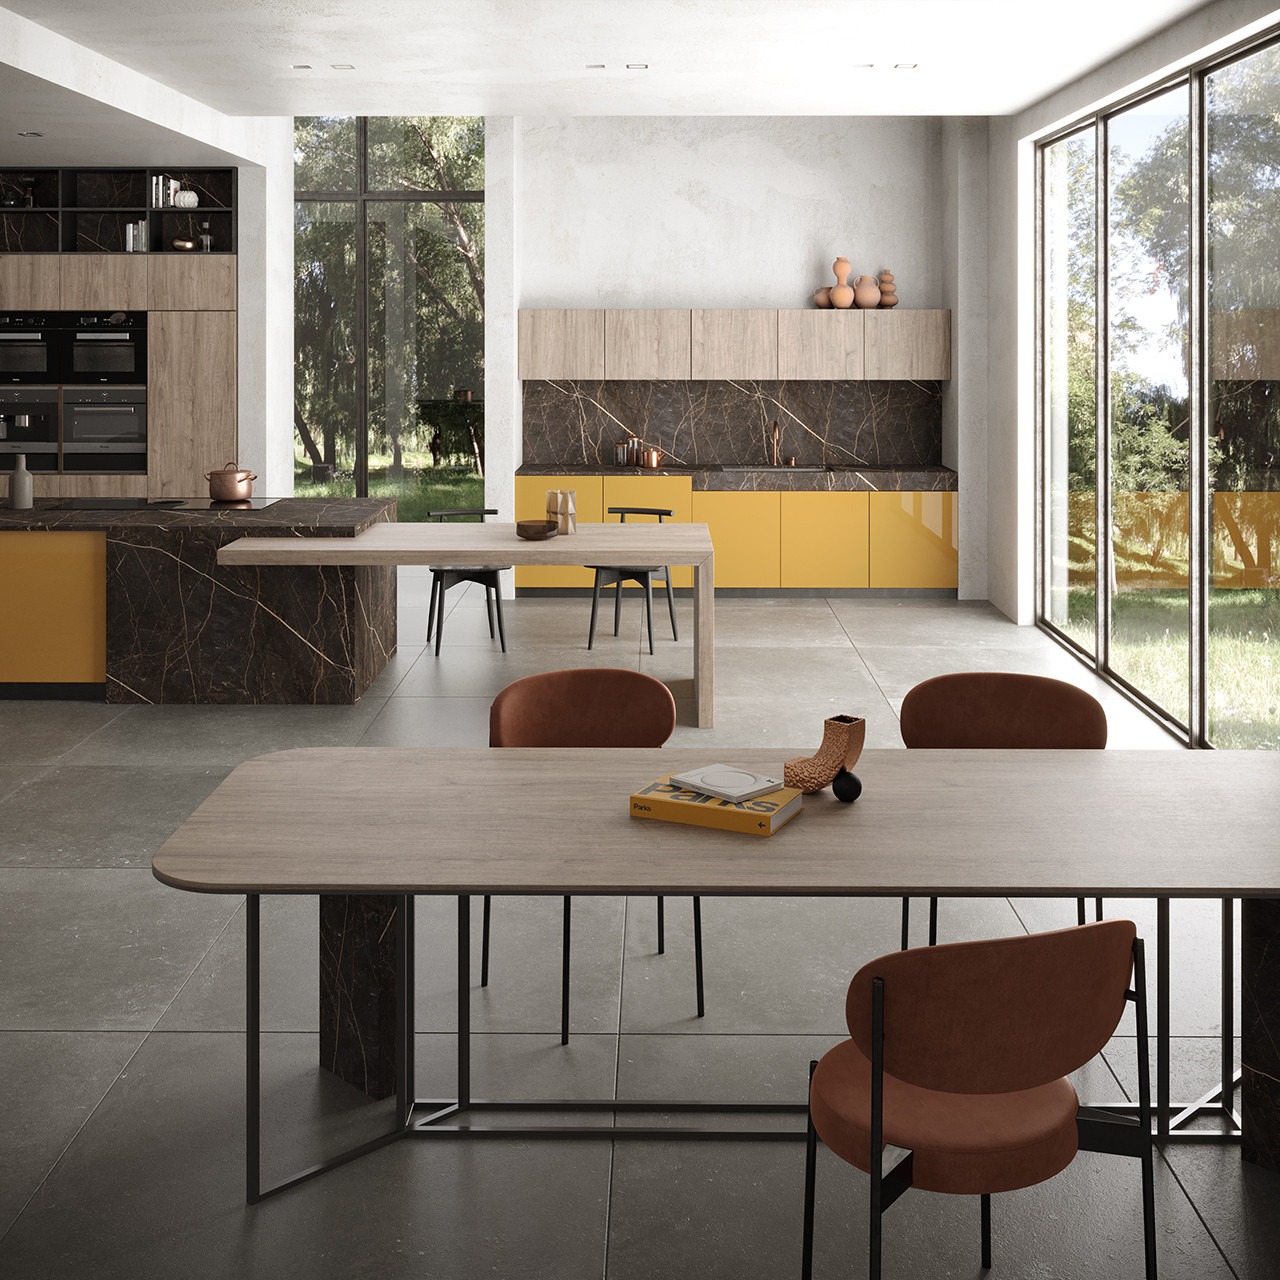 Archisearch Arpa kitchen projects and design | El Top